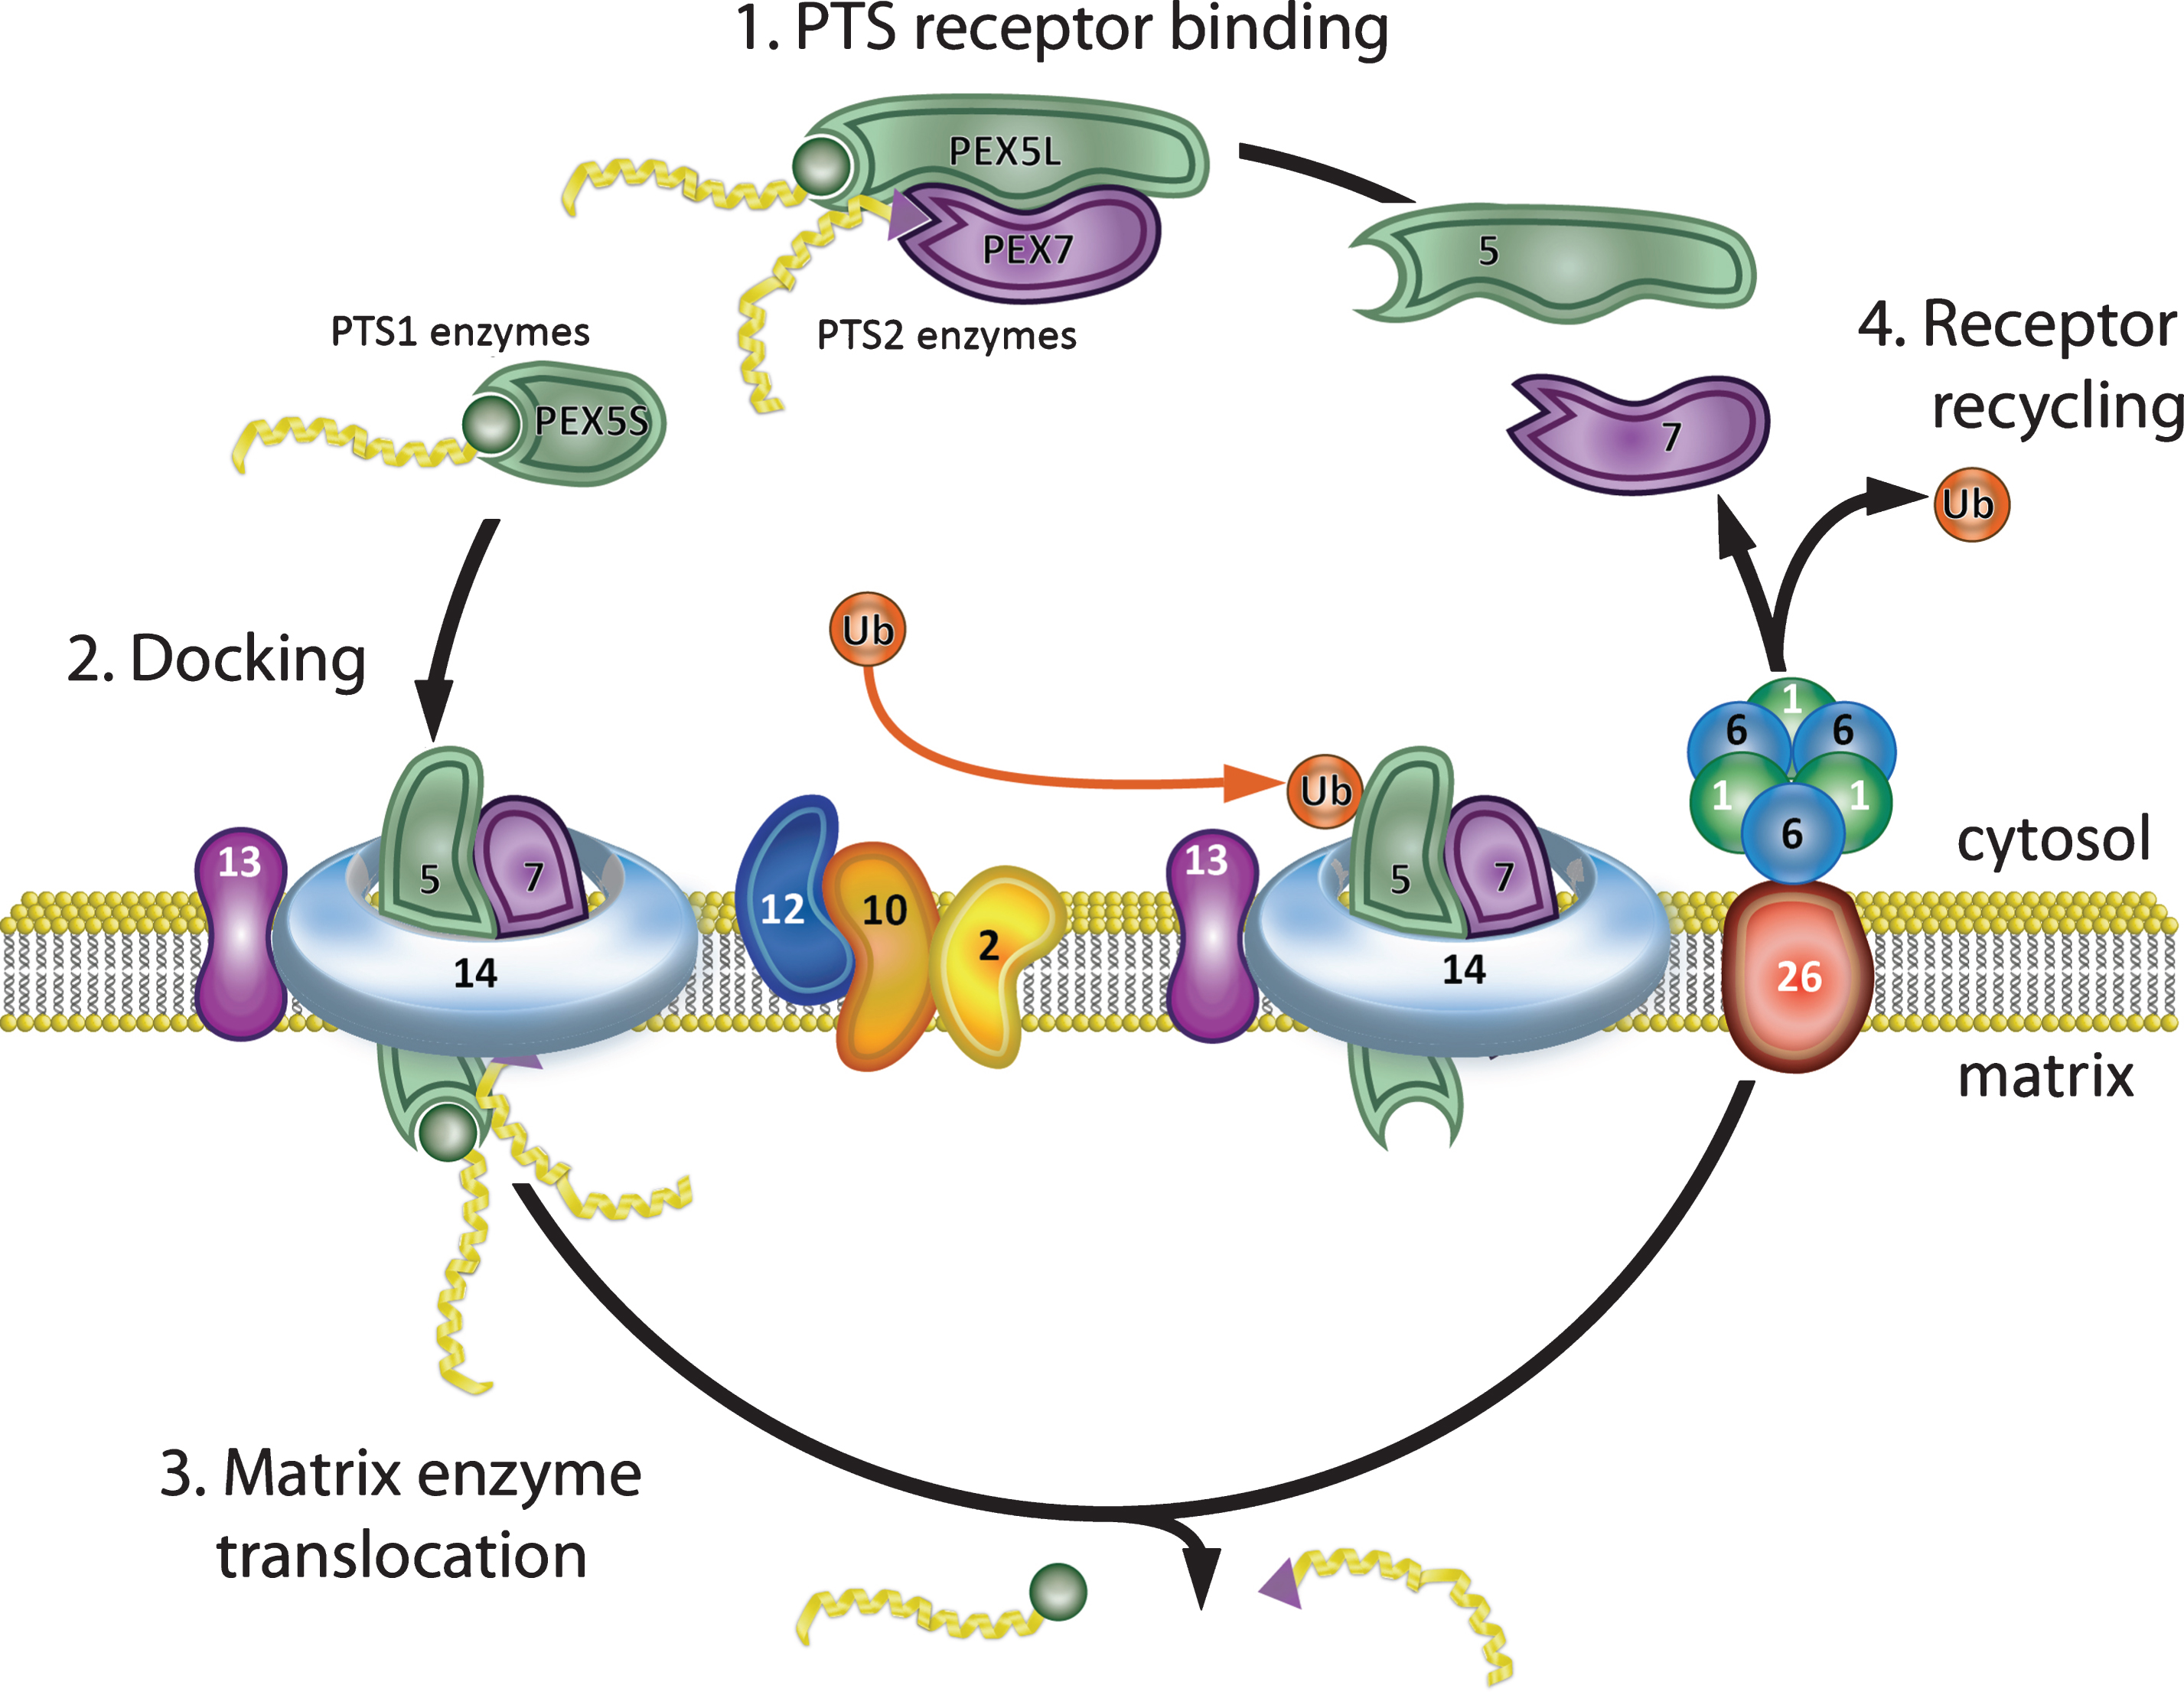 Peroxisome matrix protein import. (1) PTS receptor binding. PEX5 and PEX7 cytosolic receptors bind their cognate ligands (PTS1 and PTS2 enzymes, respectively) in the cytosol. PEX5 has two isoforms that differ by alternative splicing. The longer isoform, PEX5L, binds both PTS1 enzymes and PEX7 and delivers them to the peroxisome membrane. (2) Docking. The receptor-ligand complex docks at the peroxisome membrane by binding PEX13 and PEX14. (3) Matrix enzyme translocation. PEX5, together with PEX14, forms a dynamic membrane pore through which the ligands are transported into the peroxisome matrix. (4) Receptor recycling. PEX2, PEX10, and PEX12 mono-ubiquitinate PEX5, allowing its removal from the membrane. The PEX1-PEX6 AAA-ATPase heterohexamer (anchored to the peroxisome membrane by PEX26) uses the energy from ATP hydrolysis to remove PEX5-Ub from the peroxisome membrane for another round of import. PEX7 is recycled to the cytosol after PEX5 in an ATP independent manner. Note that defects in PEX7 prevent import of PTS2 enzymes, but do not disrupt the PEX5/PTS1 import pathway.